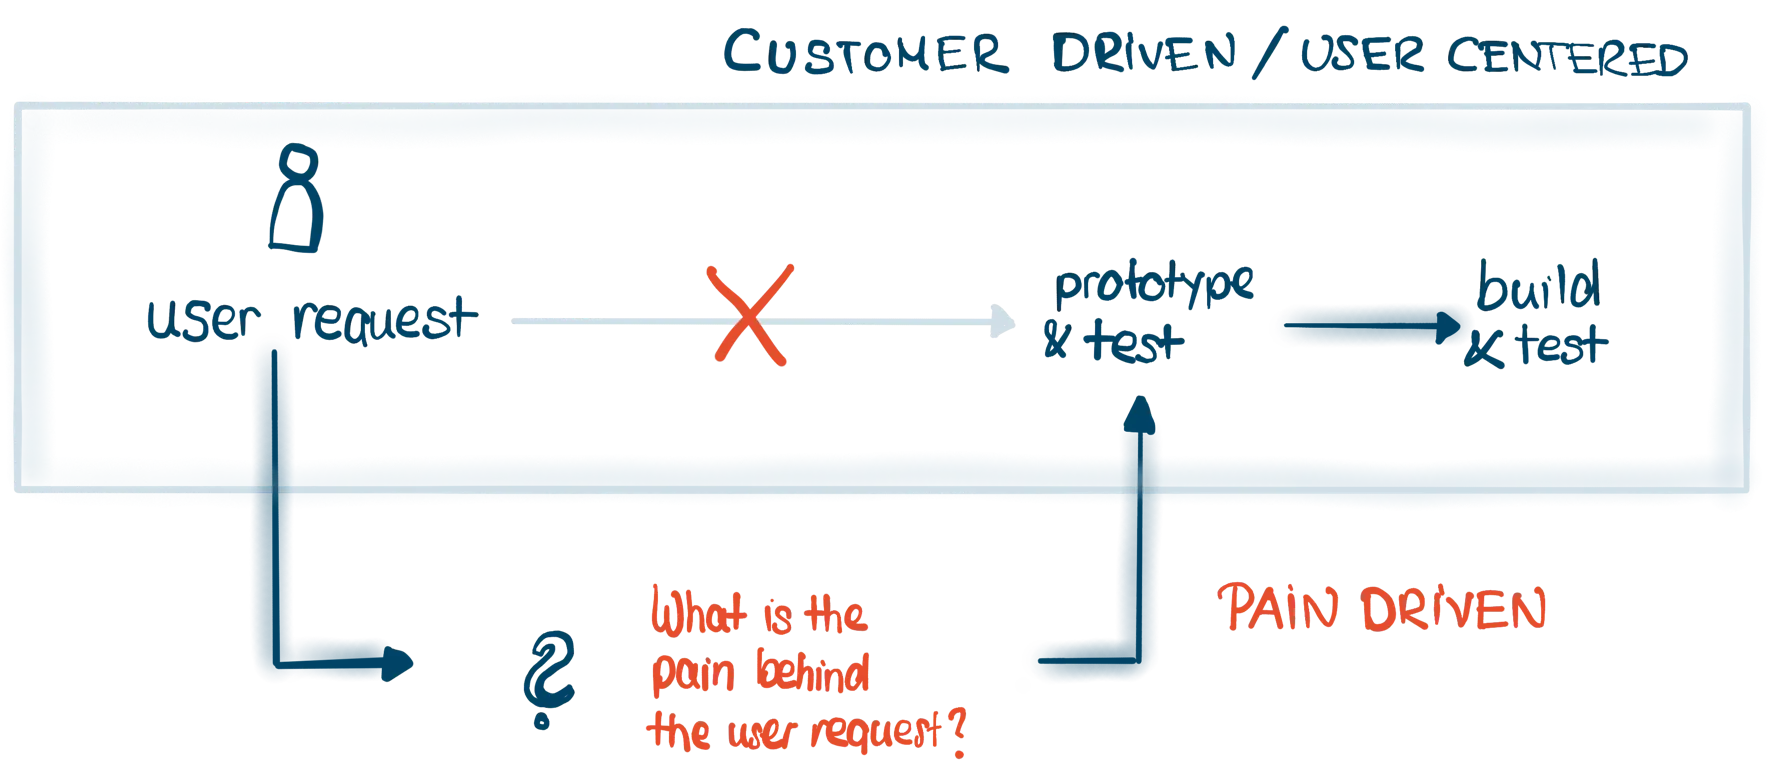 Lean UX is pain-driven - idnetify the pain the user has with the feature